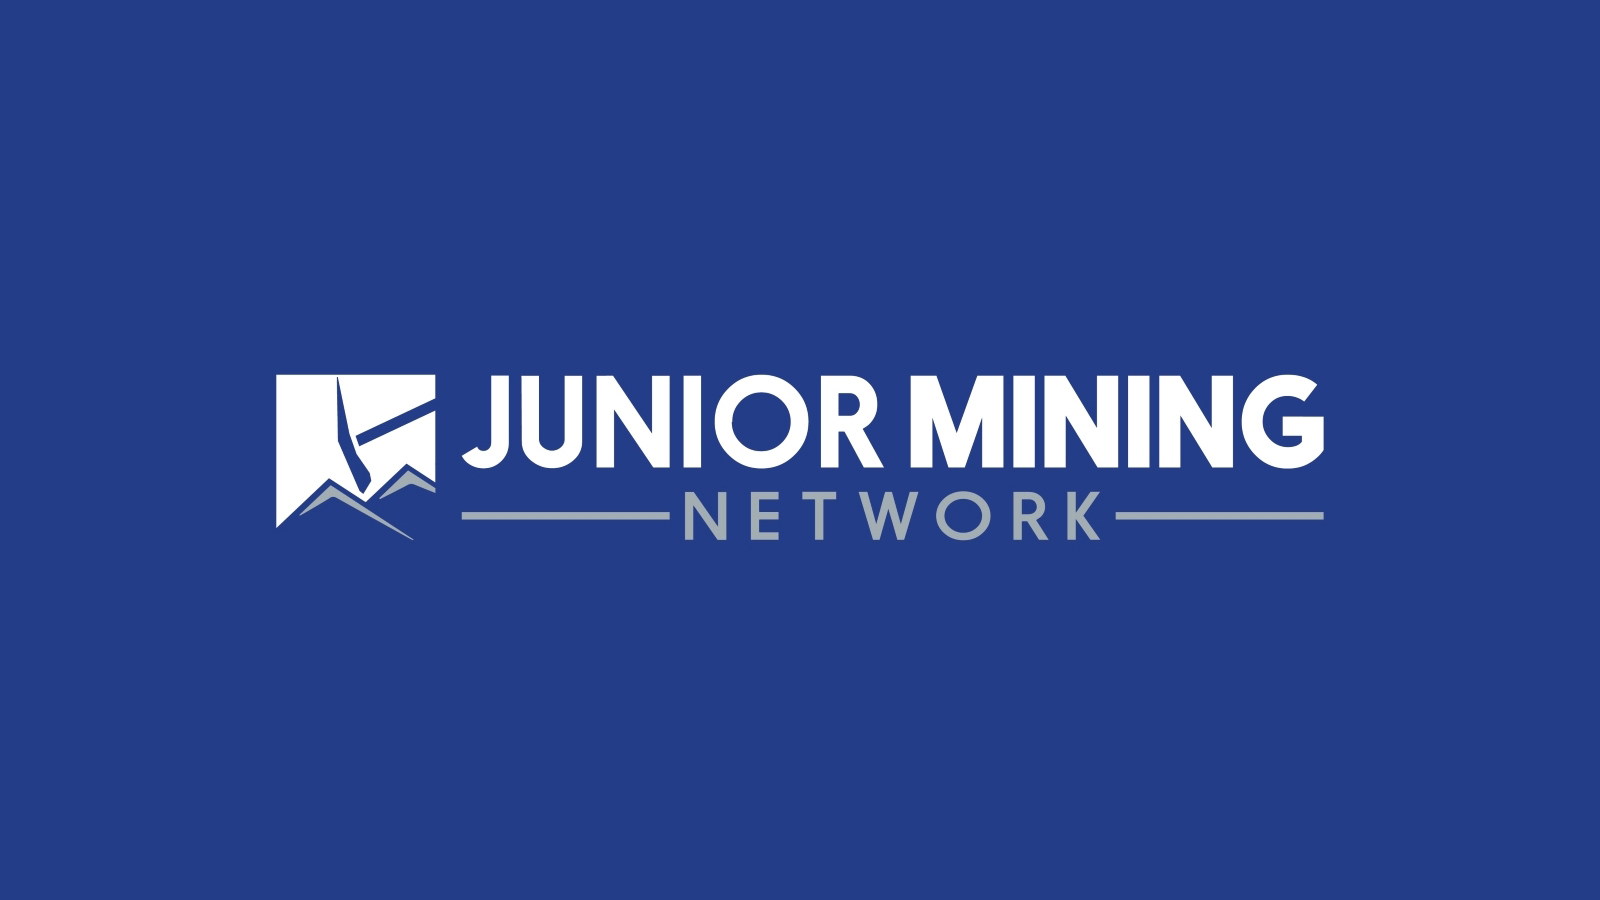 Kinross Gold to announce Q2 results on July 28, 2021